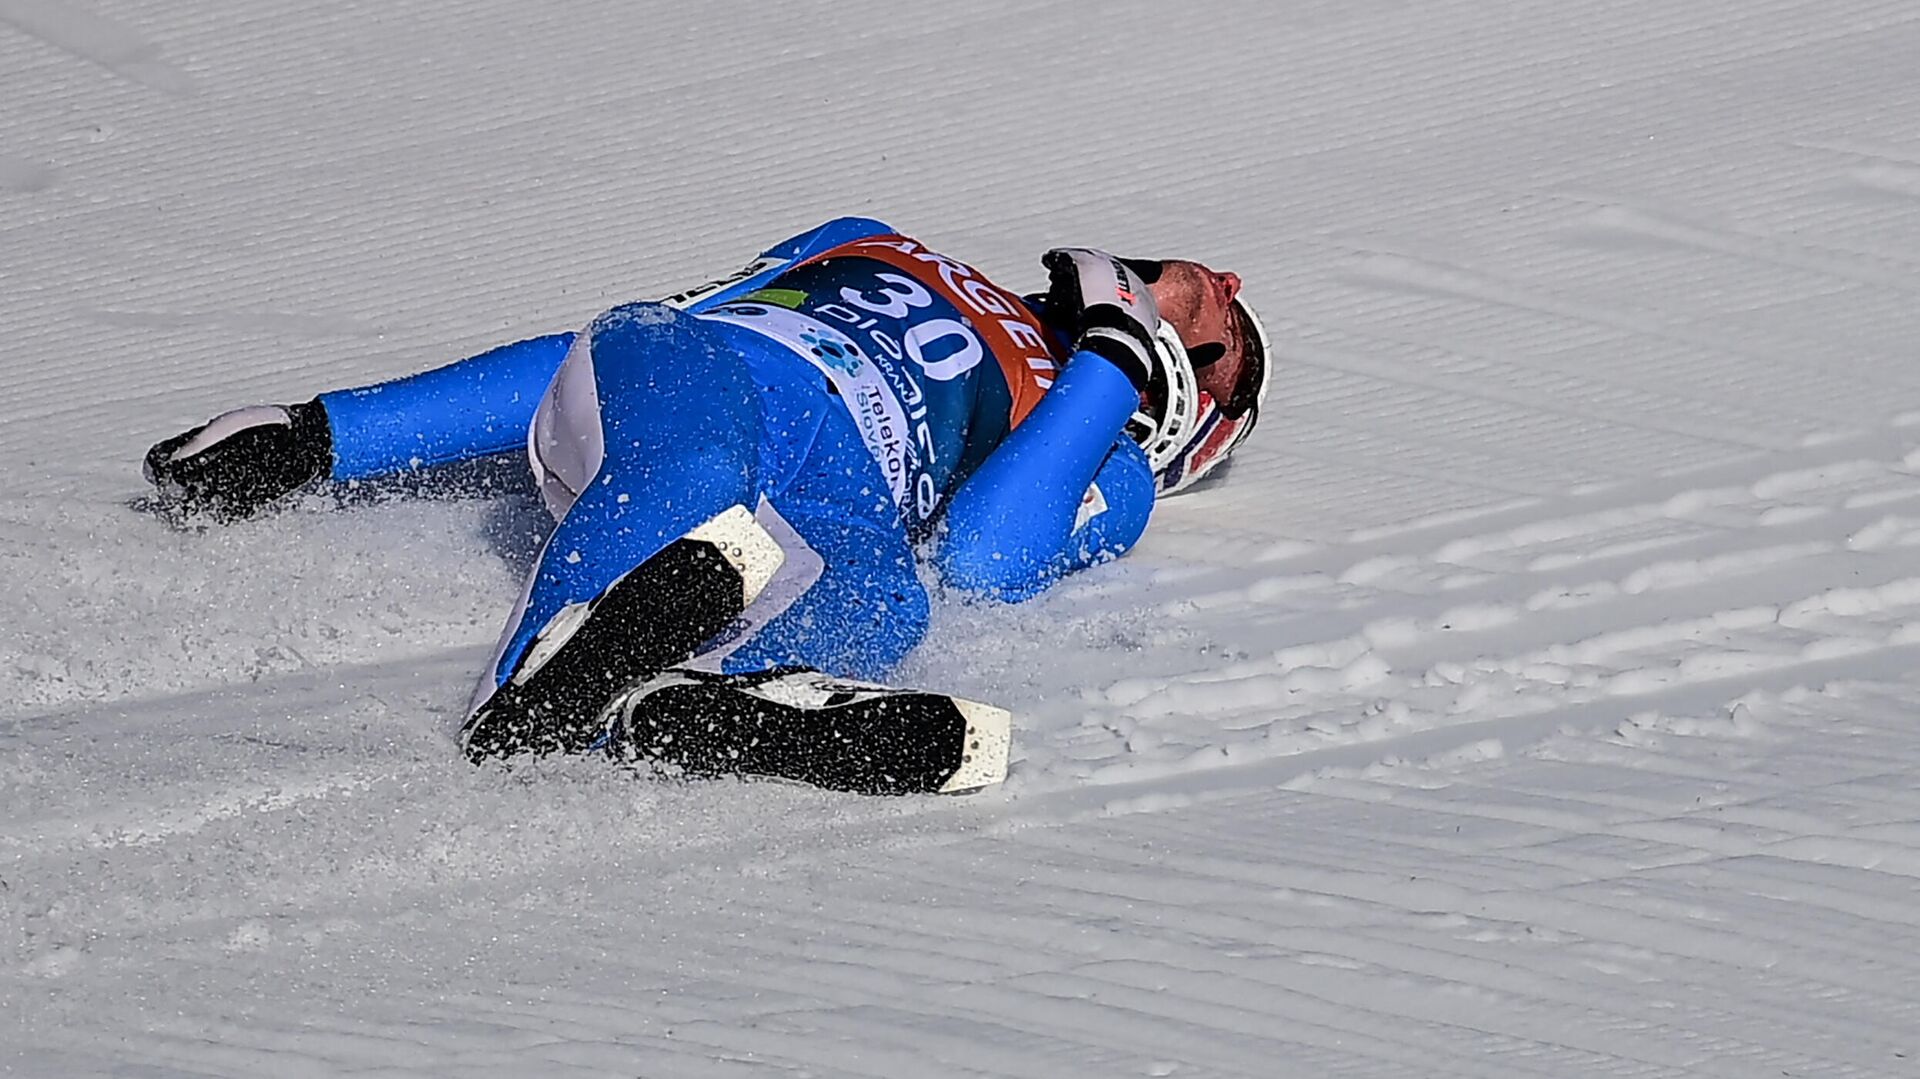 Norway’s Daniel Andre Tande lies on the snow after a fall during the FIS Ski Jumping World Cup Flying Hill Individual competition in Planica on March 25, 2021. (Photo by Jure MAKOVEC / AFP) - РИА Новости, 1920, 25.03.2021